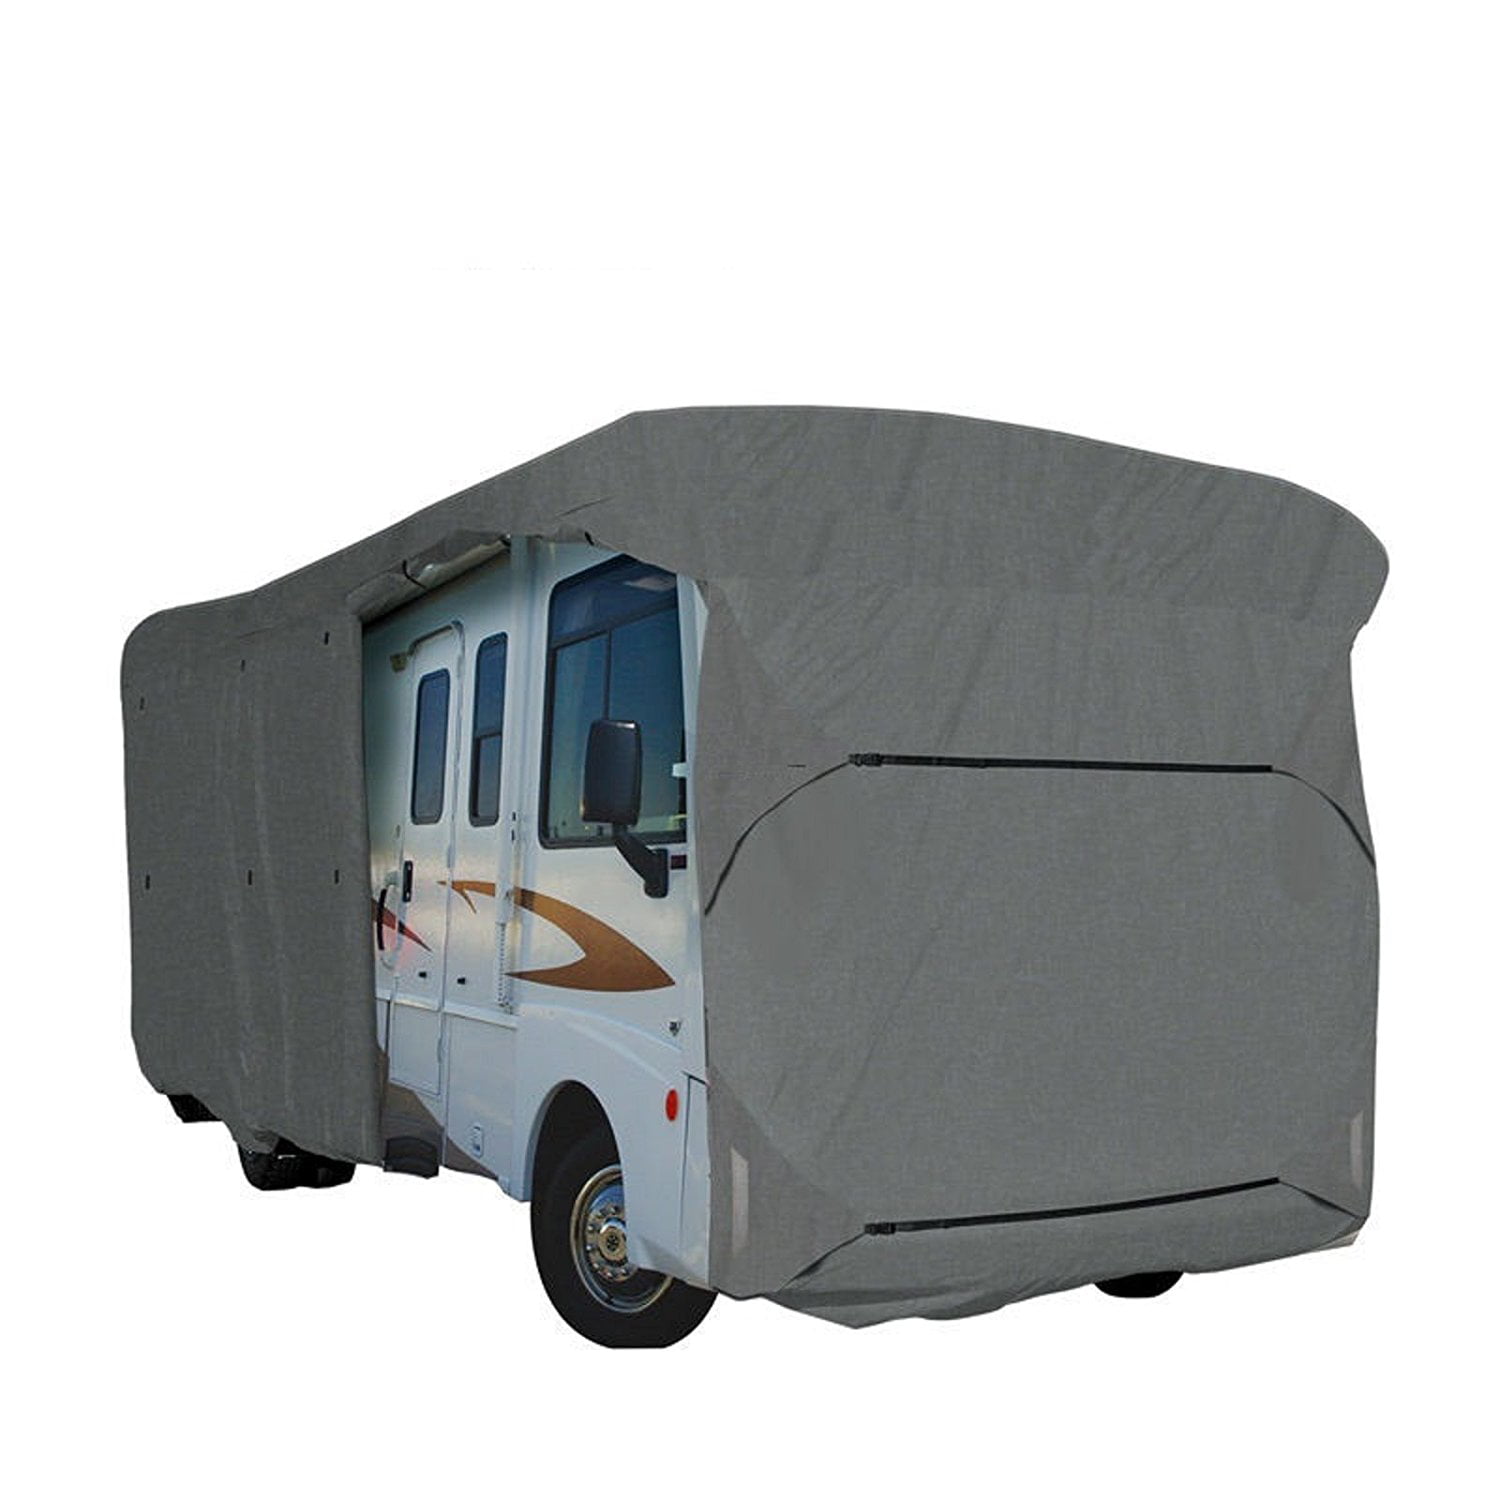 Tongue Jack Cover RVMasking Upgraded Waterproof 500D Top Travel Trailer Cover for 15'1-18' RV Camper Motorhome with 4 Tire Covers 